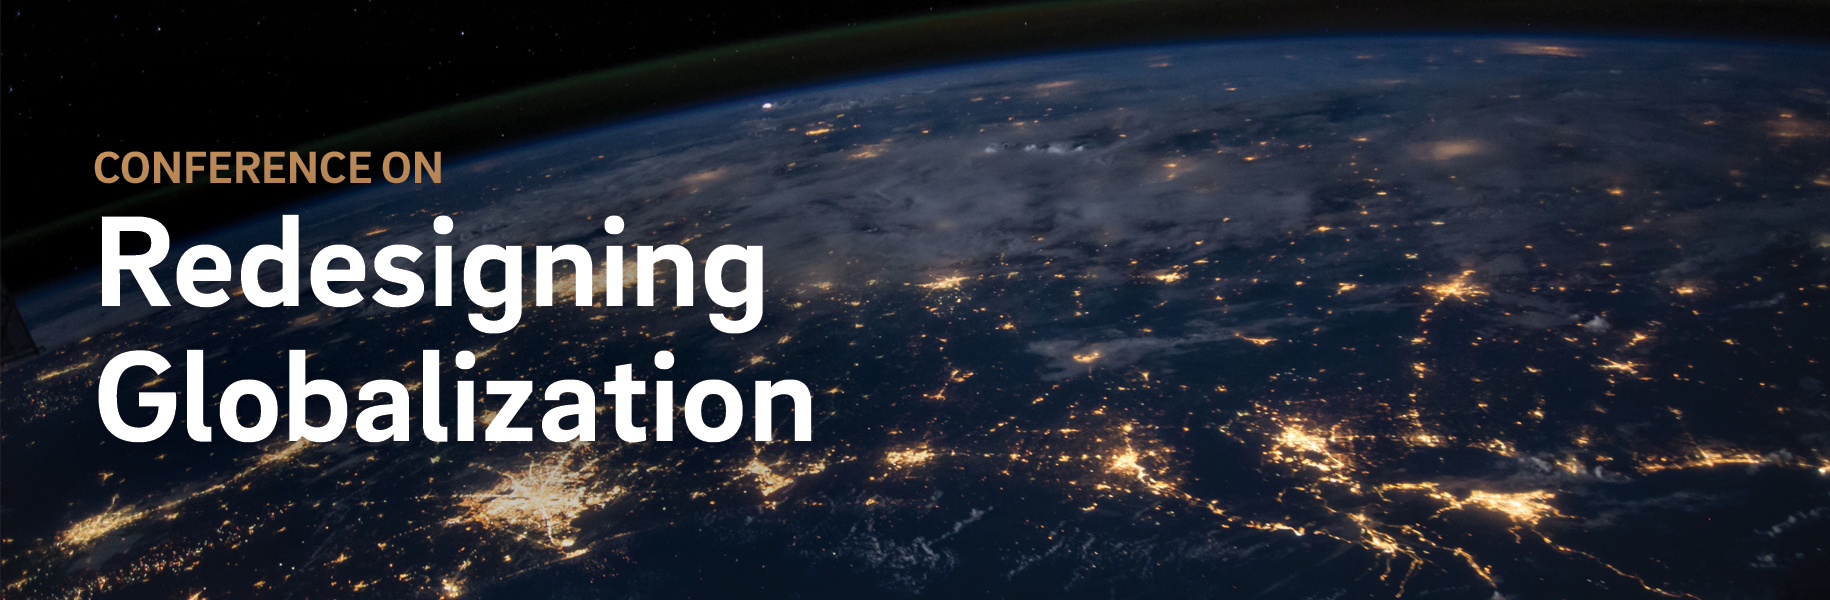 Conference on Redesigning Globalization